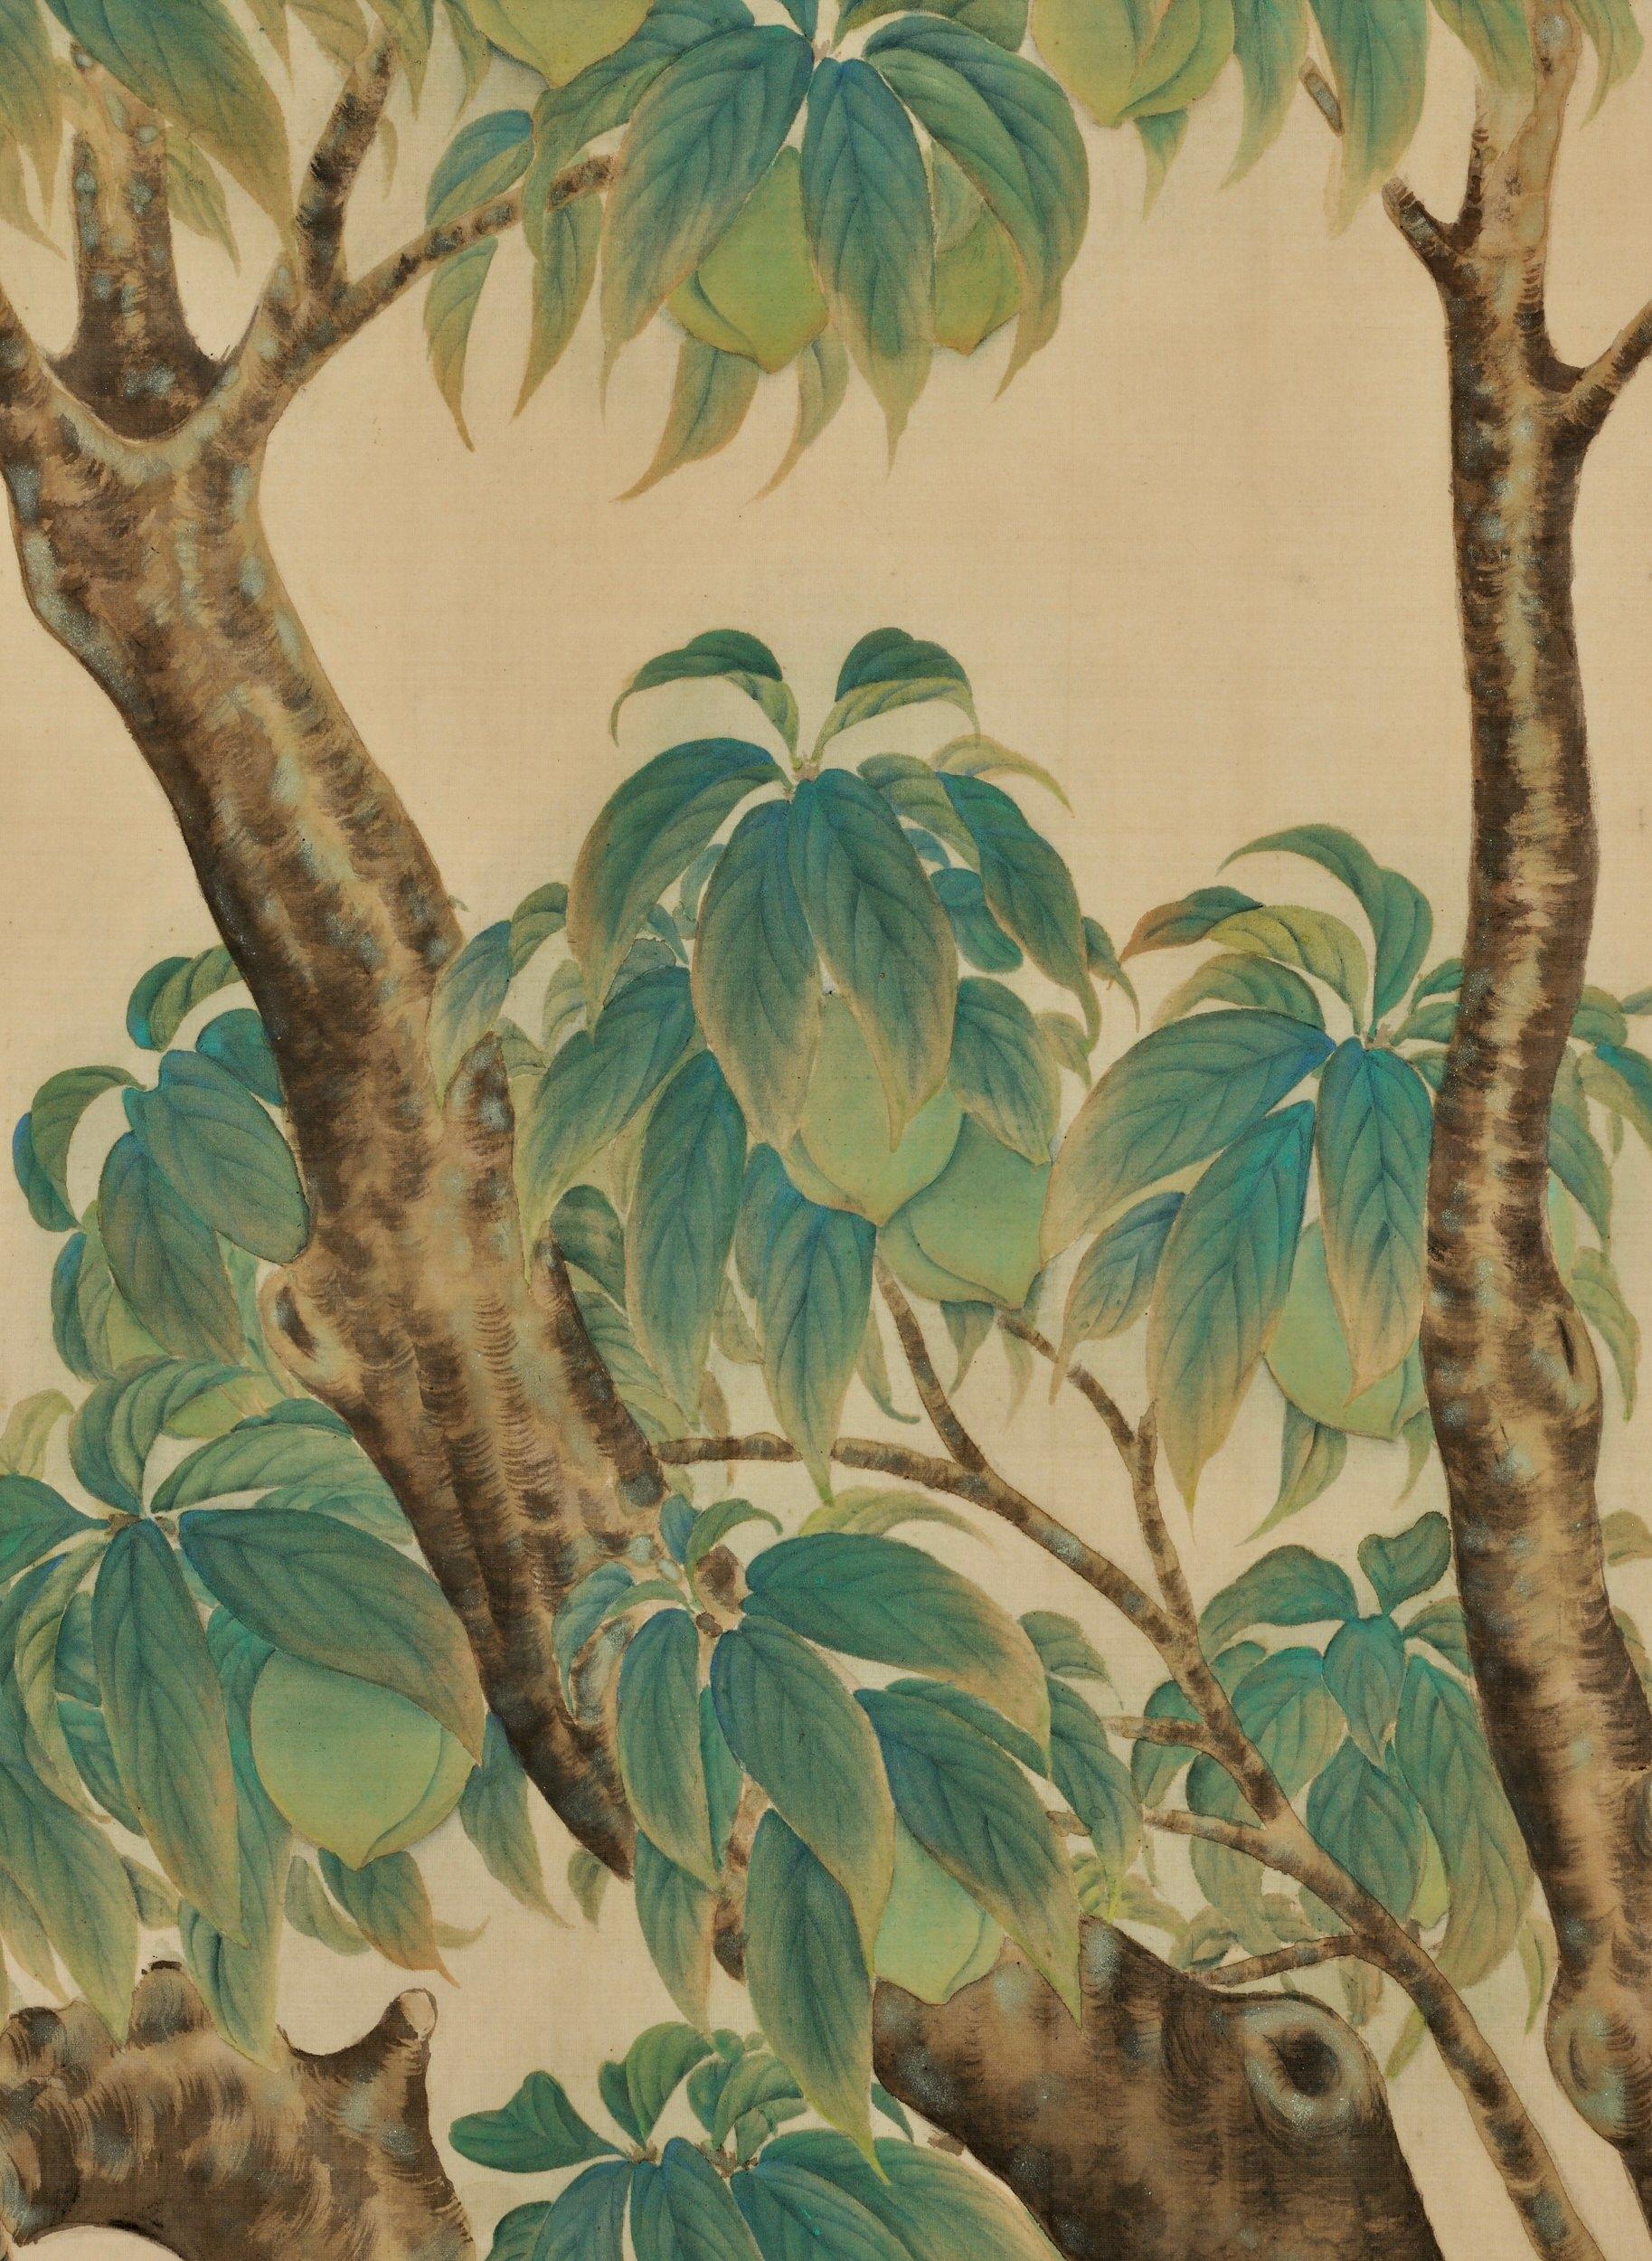 Nakamura Daizaburo

Turtledoves in a Peach Tree

Taisho period, circa 1920

Framed painting. Mineral pigments, ink and gofun on silk

Signed: Daizaburo

Dimensions (framed):

W. 95.5 cm x H. 89 cm x D. 2.5 cm

This is an example of